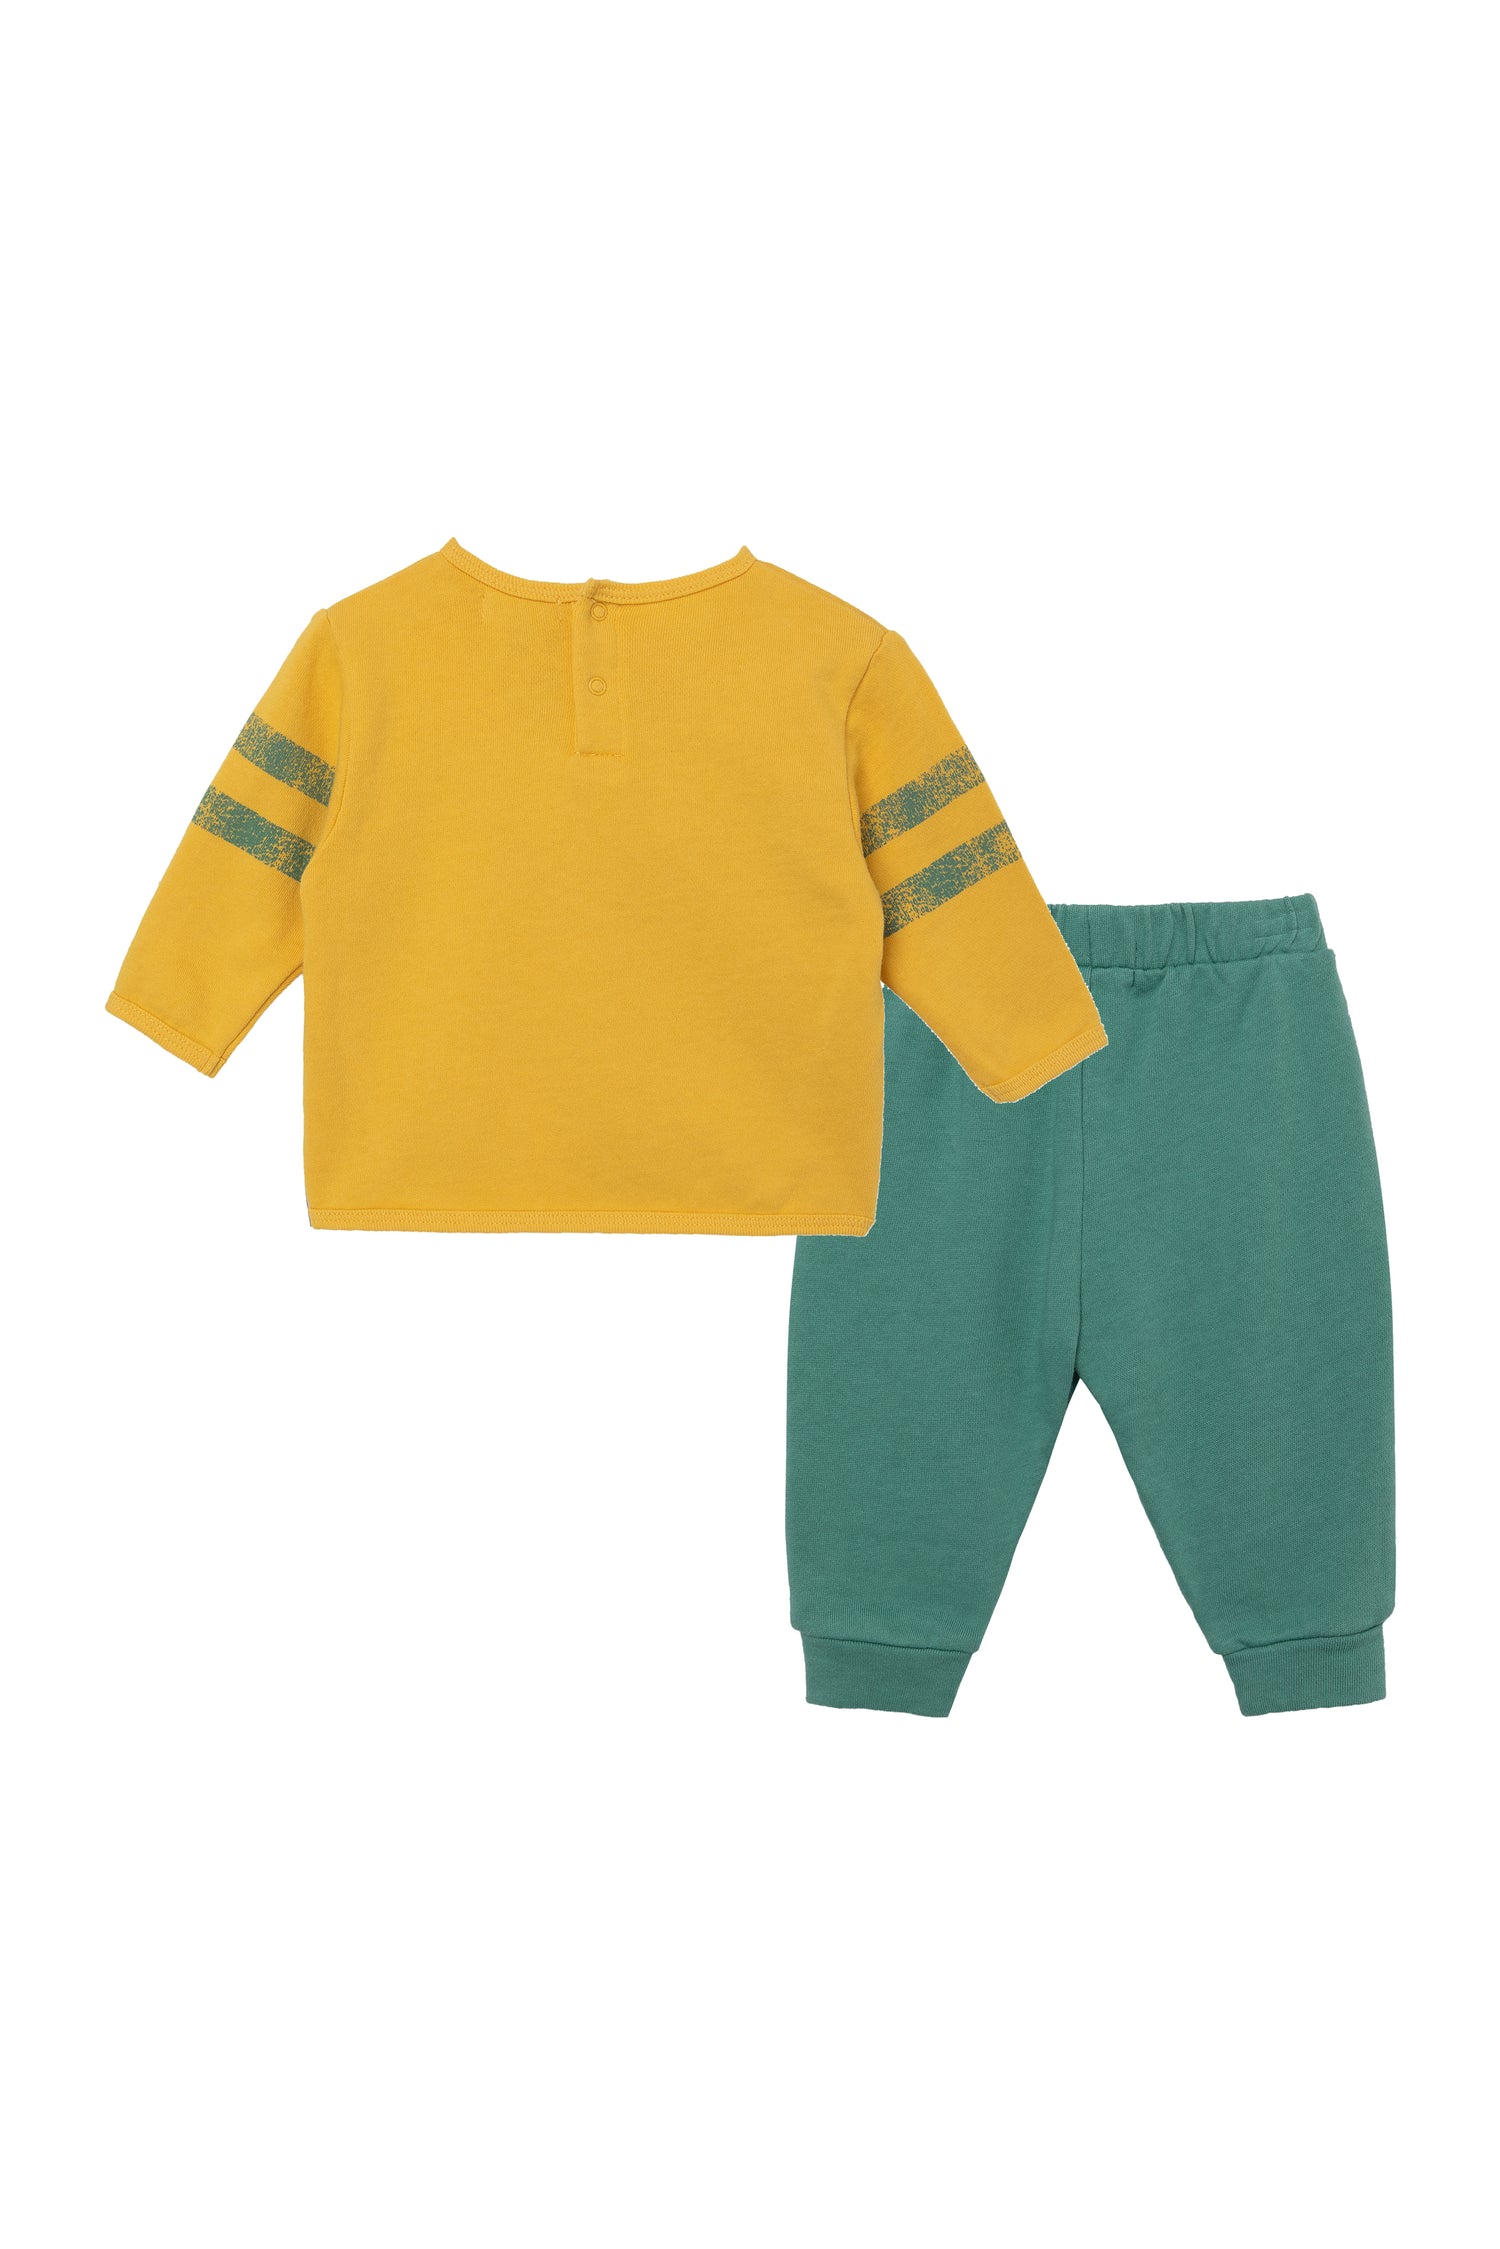 Back view of yellow and green pant and shirt set 